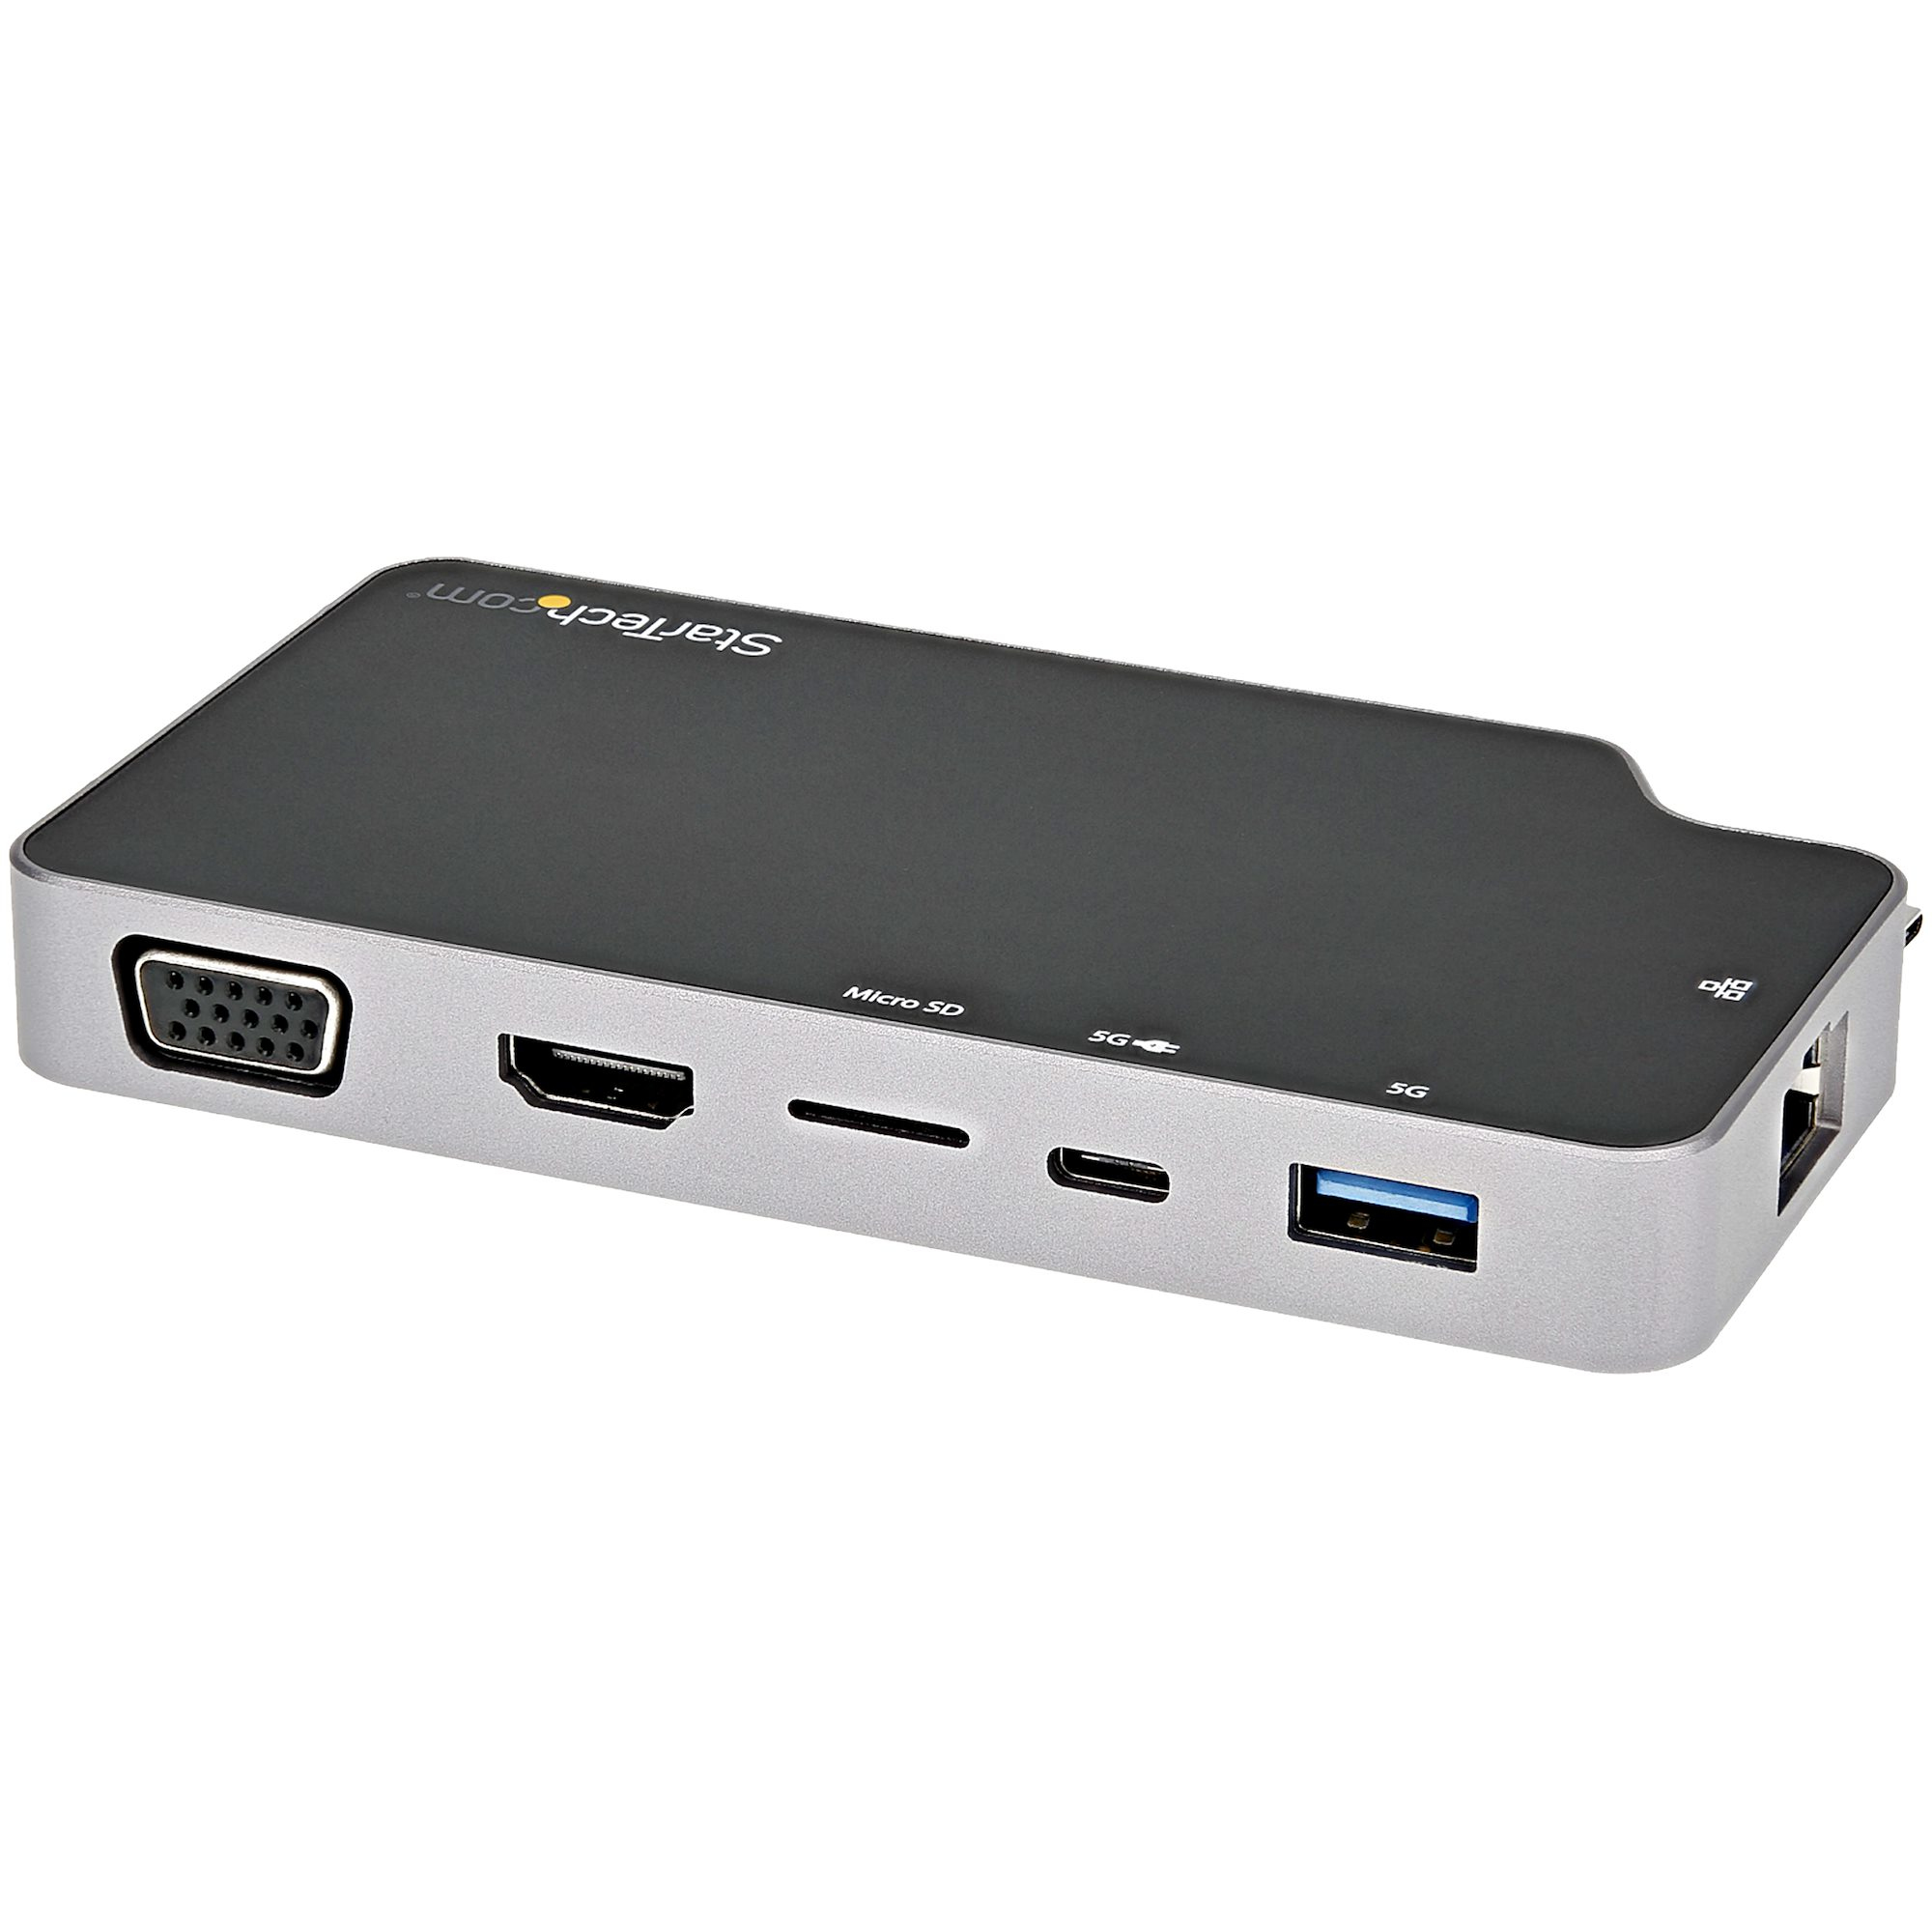 StarTech.com USB C Multiport Adapter - USB-C to 4K HDMI or VGA Video with 100W Power Delivery Pass-through, 2-Port 10Gbps USB Hub, MicroSD, GbE - USB 3.1 Gen 2 Type-C Mini/Travel Dock